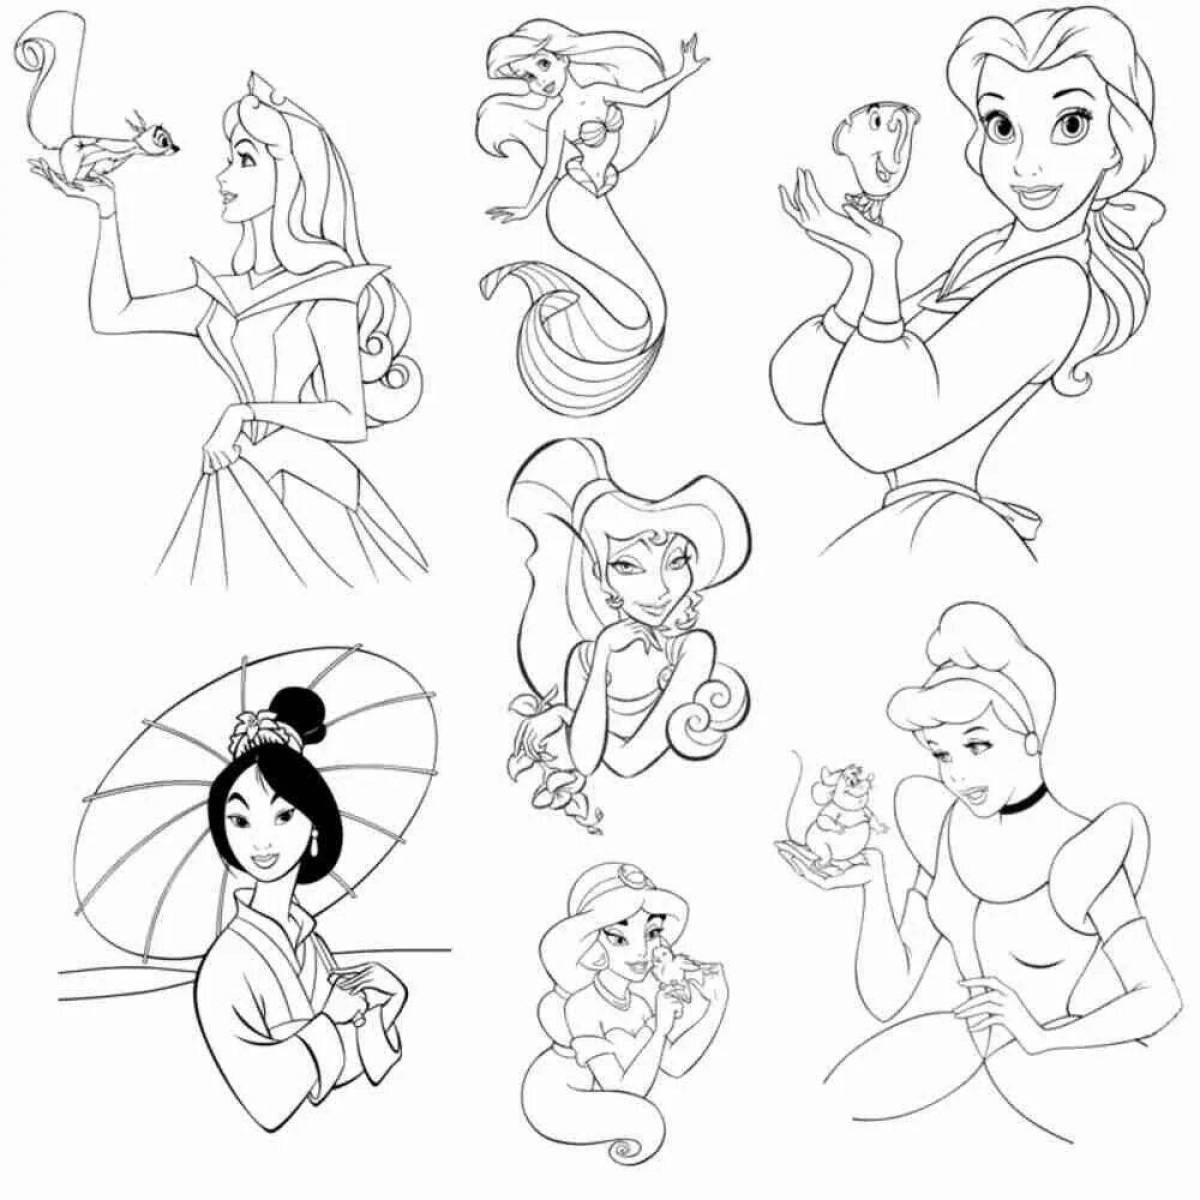 Colorful coloring book for kids with disney princesses